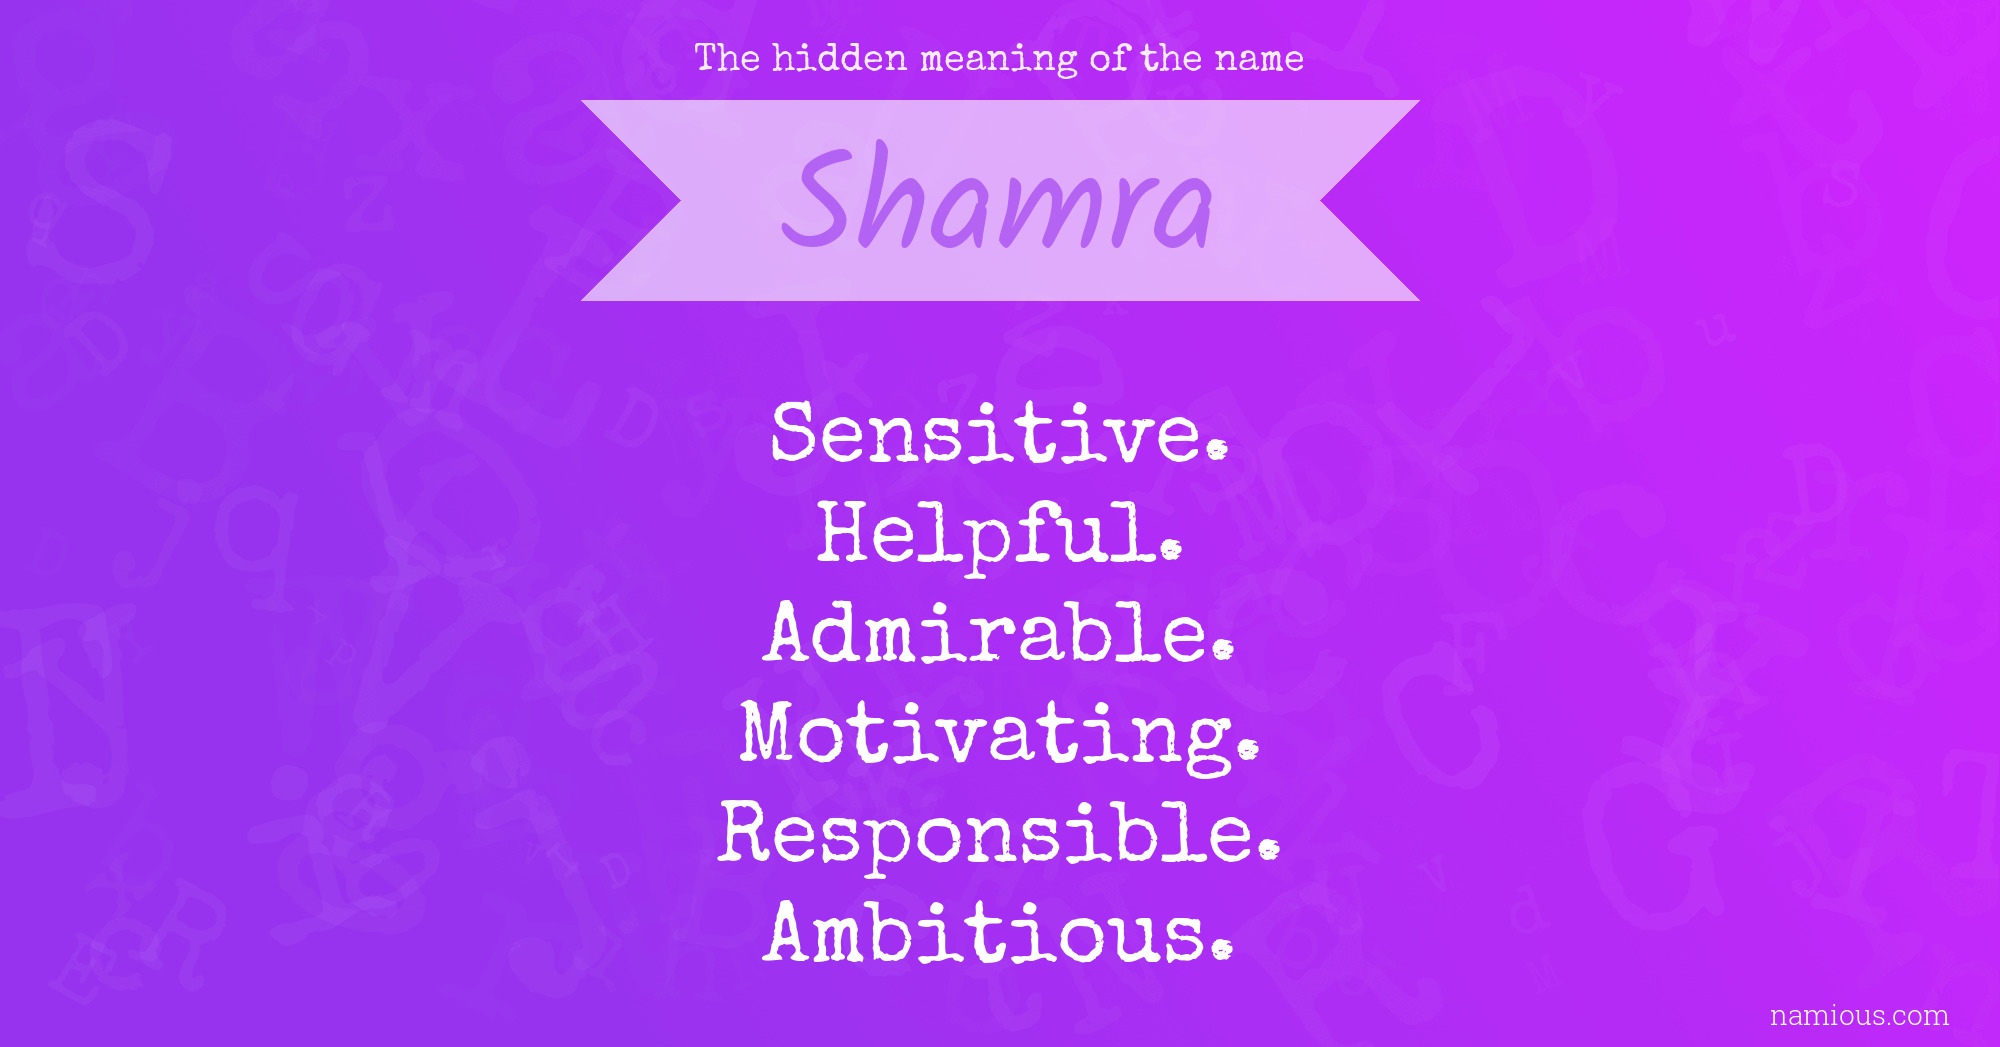 The hidden meaning of the name Shamra